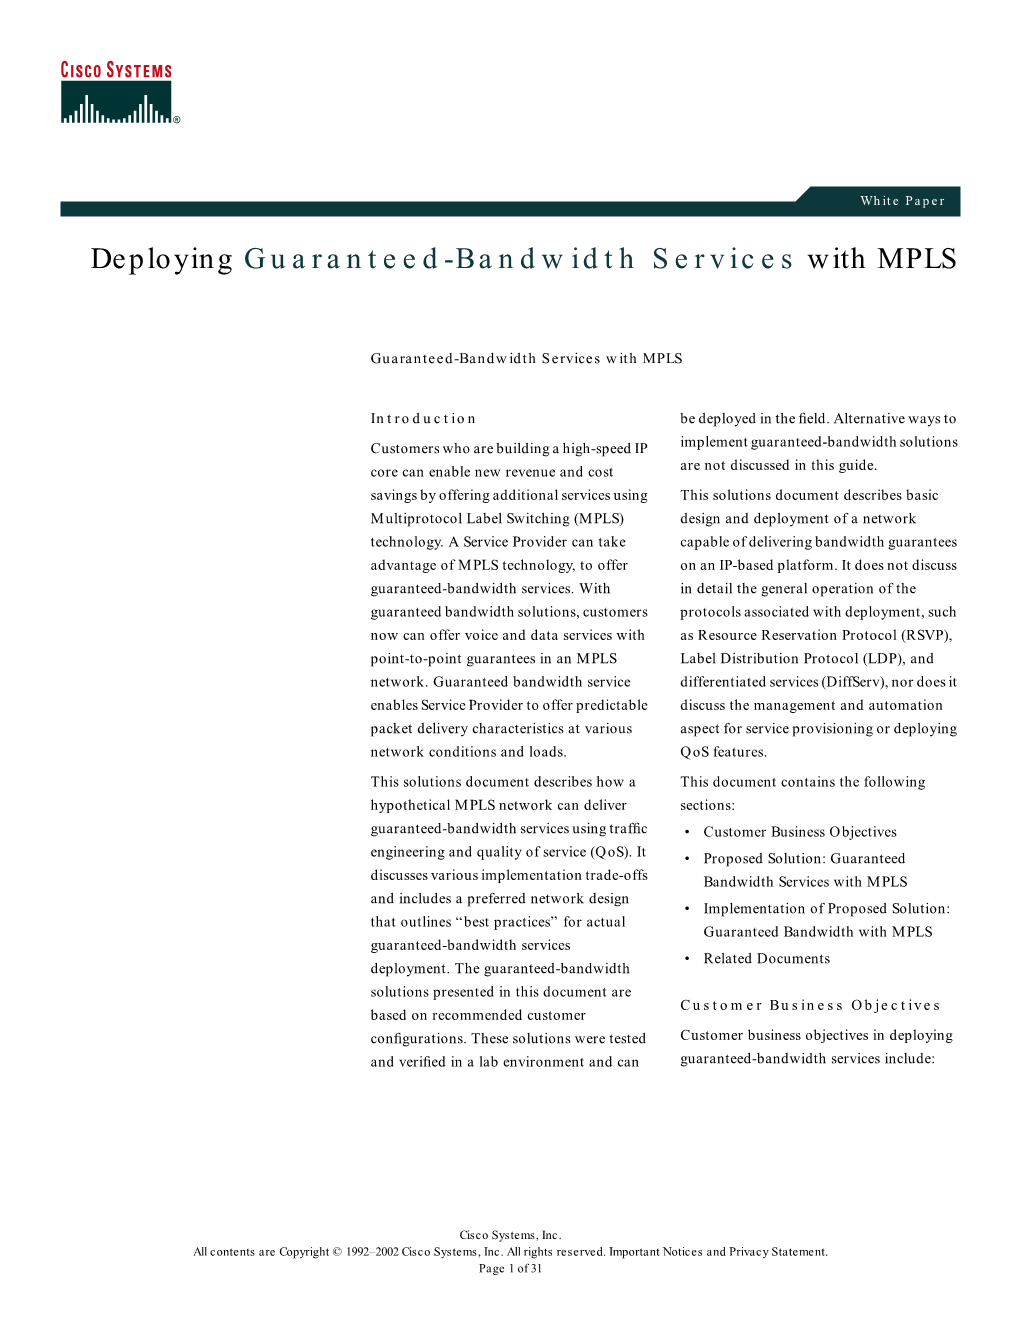 Deploying Guaranteed-Bandwidth Services with MPLS